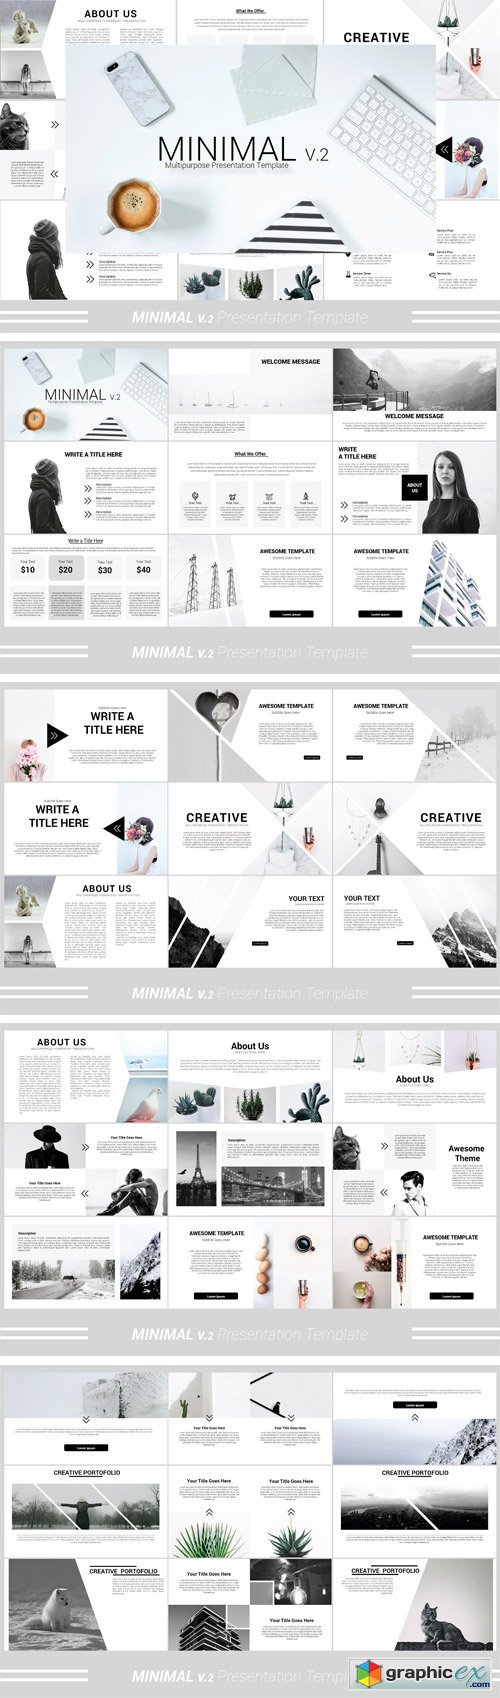 Minimal v.2 Powerpoint Template